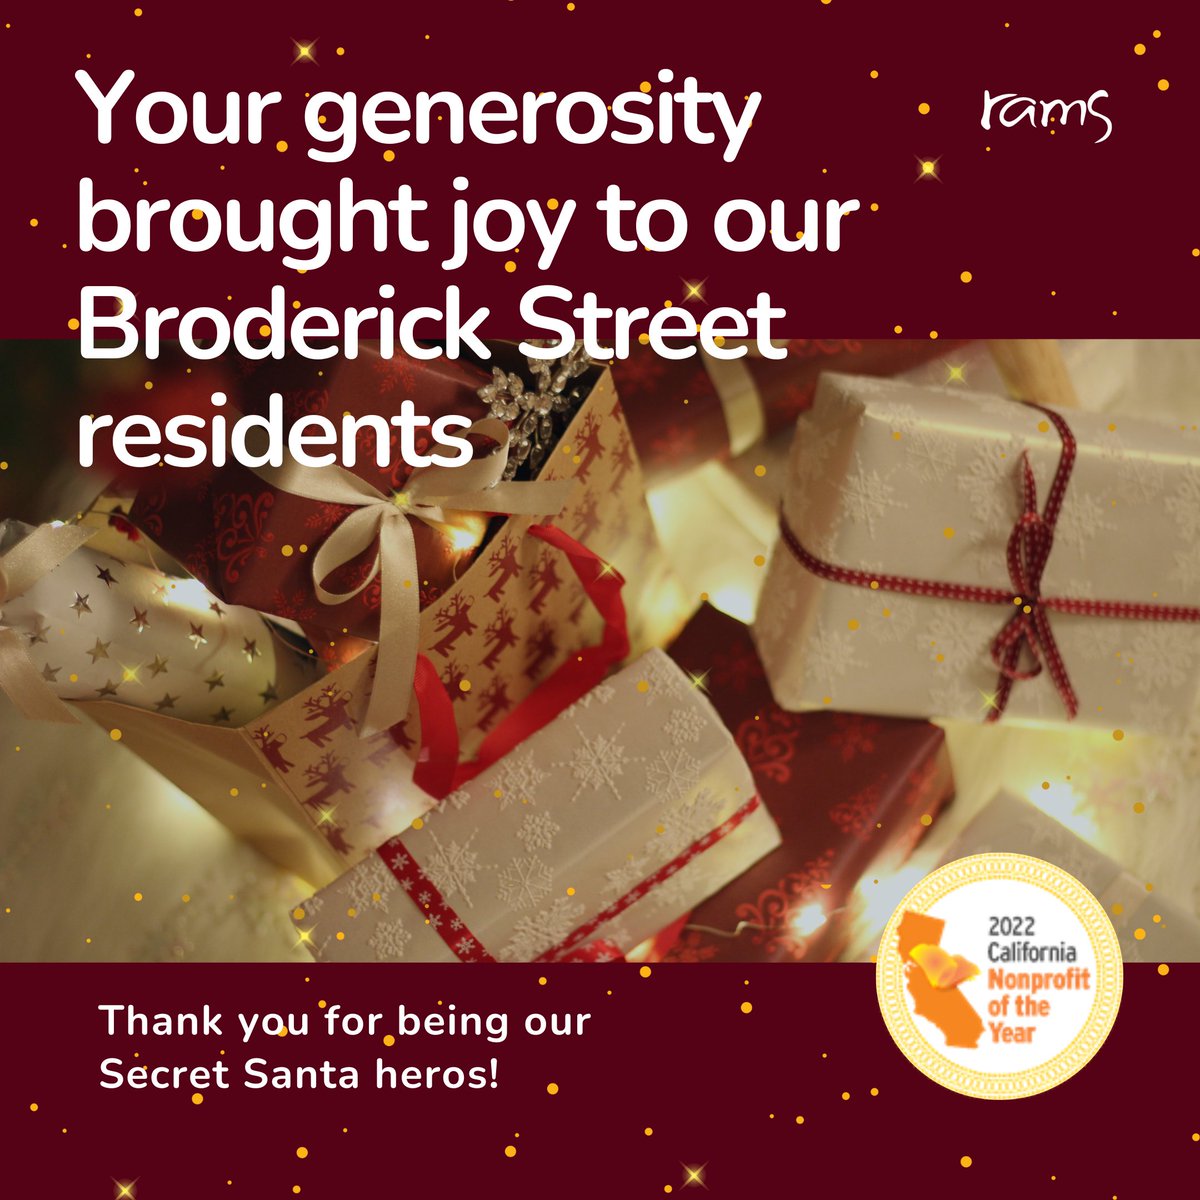 Big thanks to our generous Secret Santas! Your donations have made the season extra special for our Broderick Street Residents. We met our goal and our residents are grateful! To learn more about our Broderick Street Facility, visit ramsinc.org/broderick-stre…